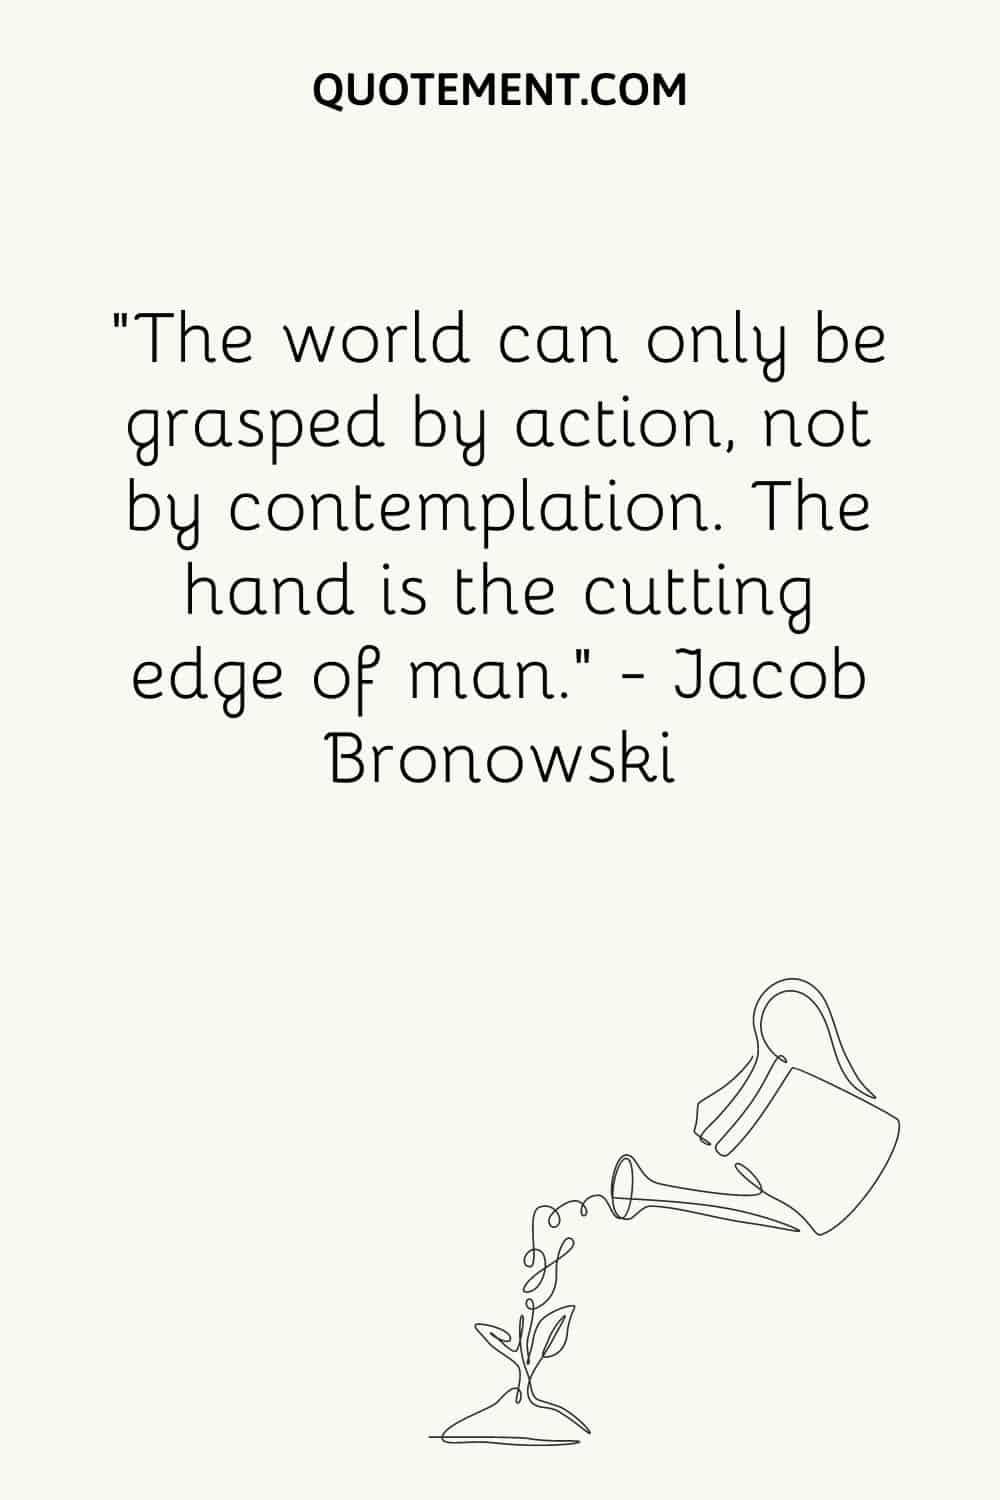 The world can only be grasped by action, not by contemplation